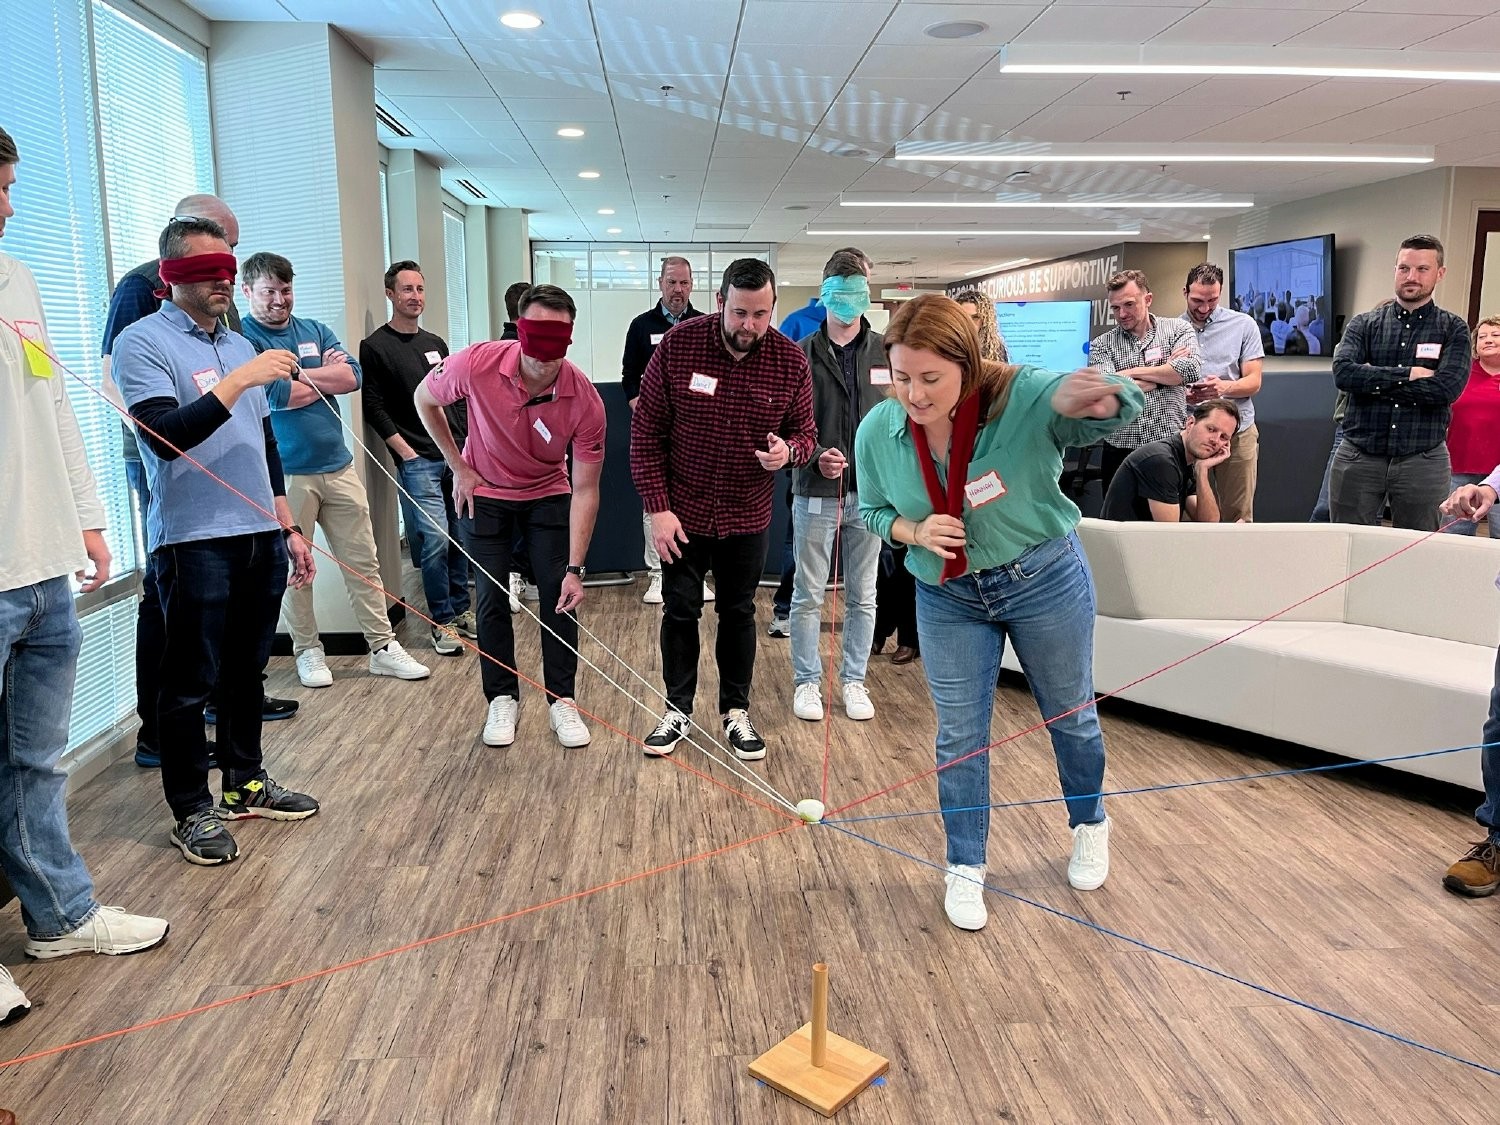 Who says meetings are boring? At our leadership event we practiced effective communication via a string ball challenge.